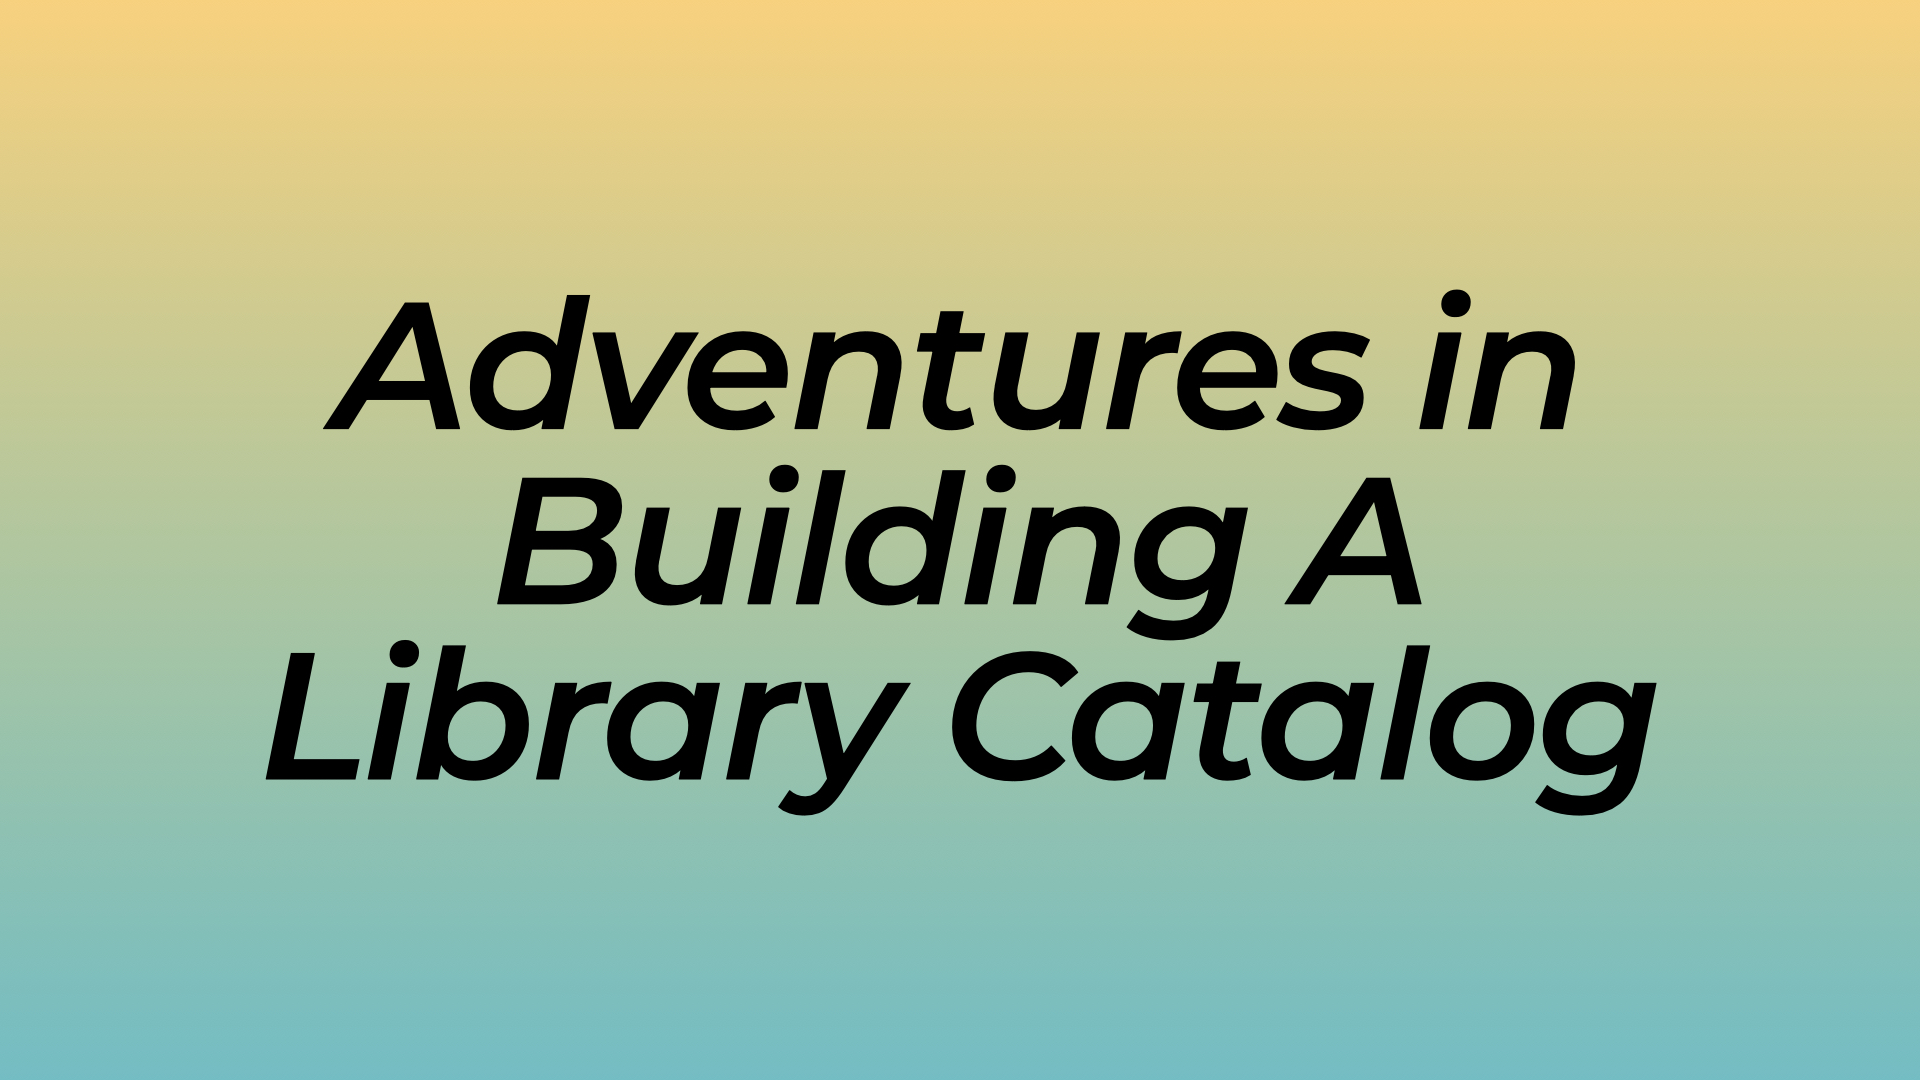 Adventures in Building a Library Catalog